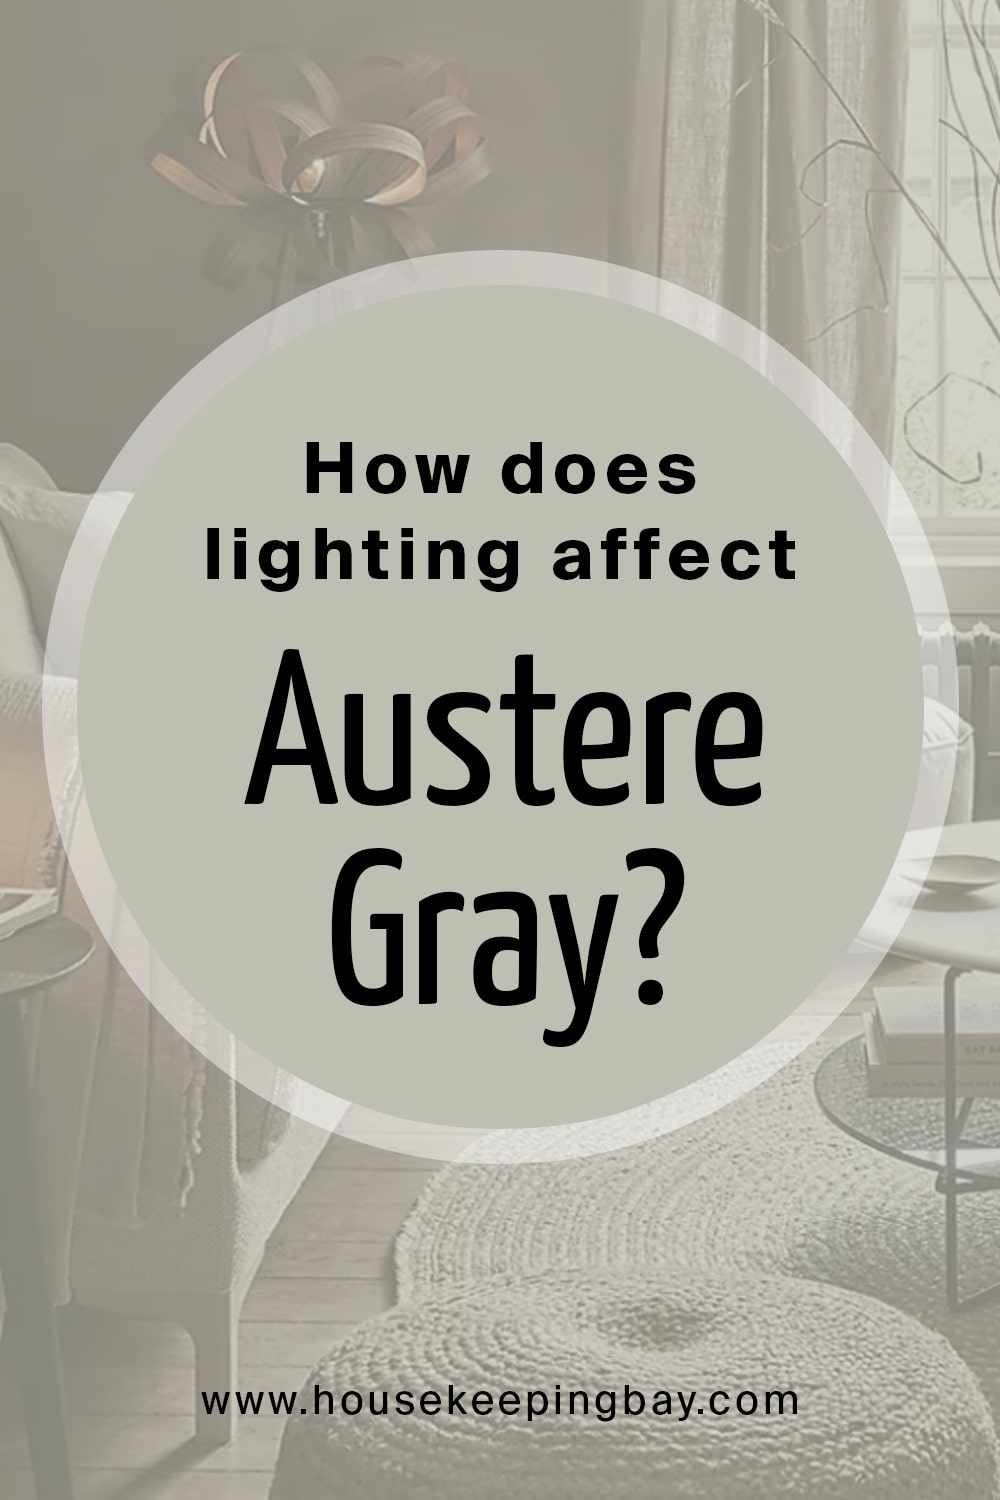 How does lighting affect Austere Gray